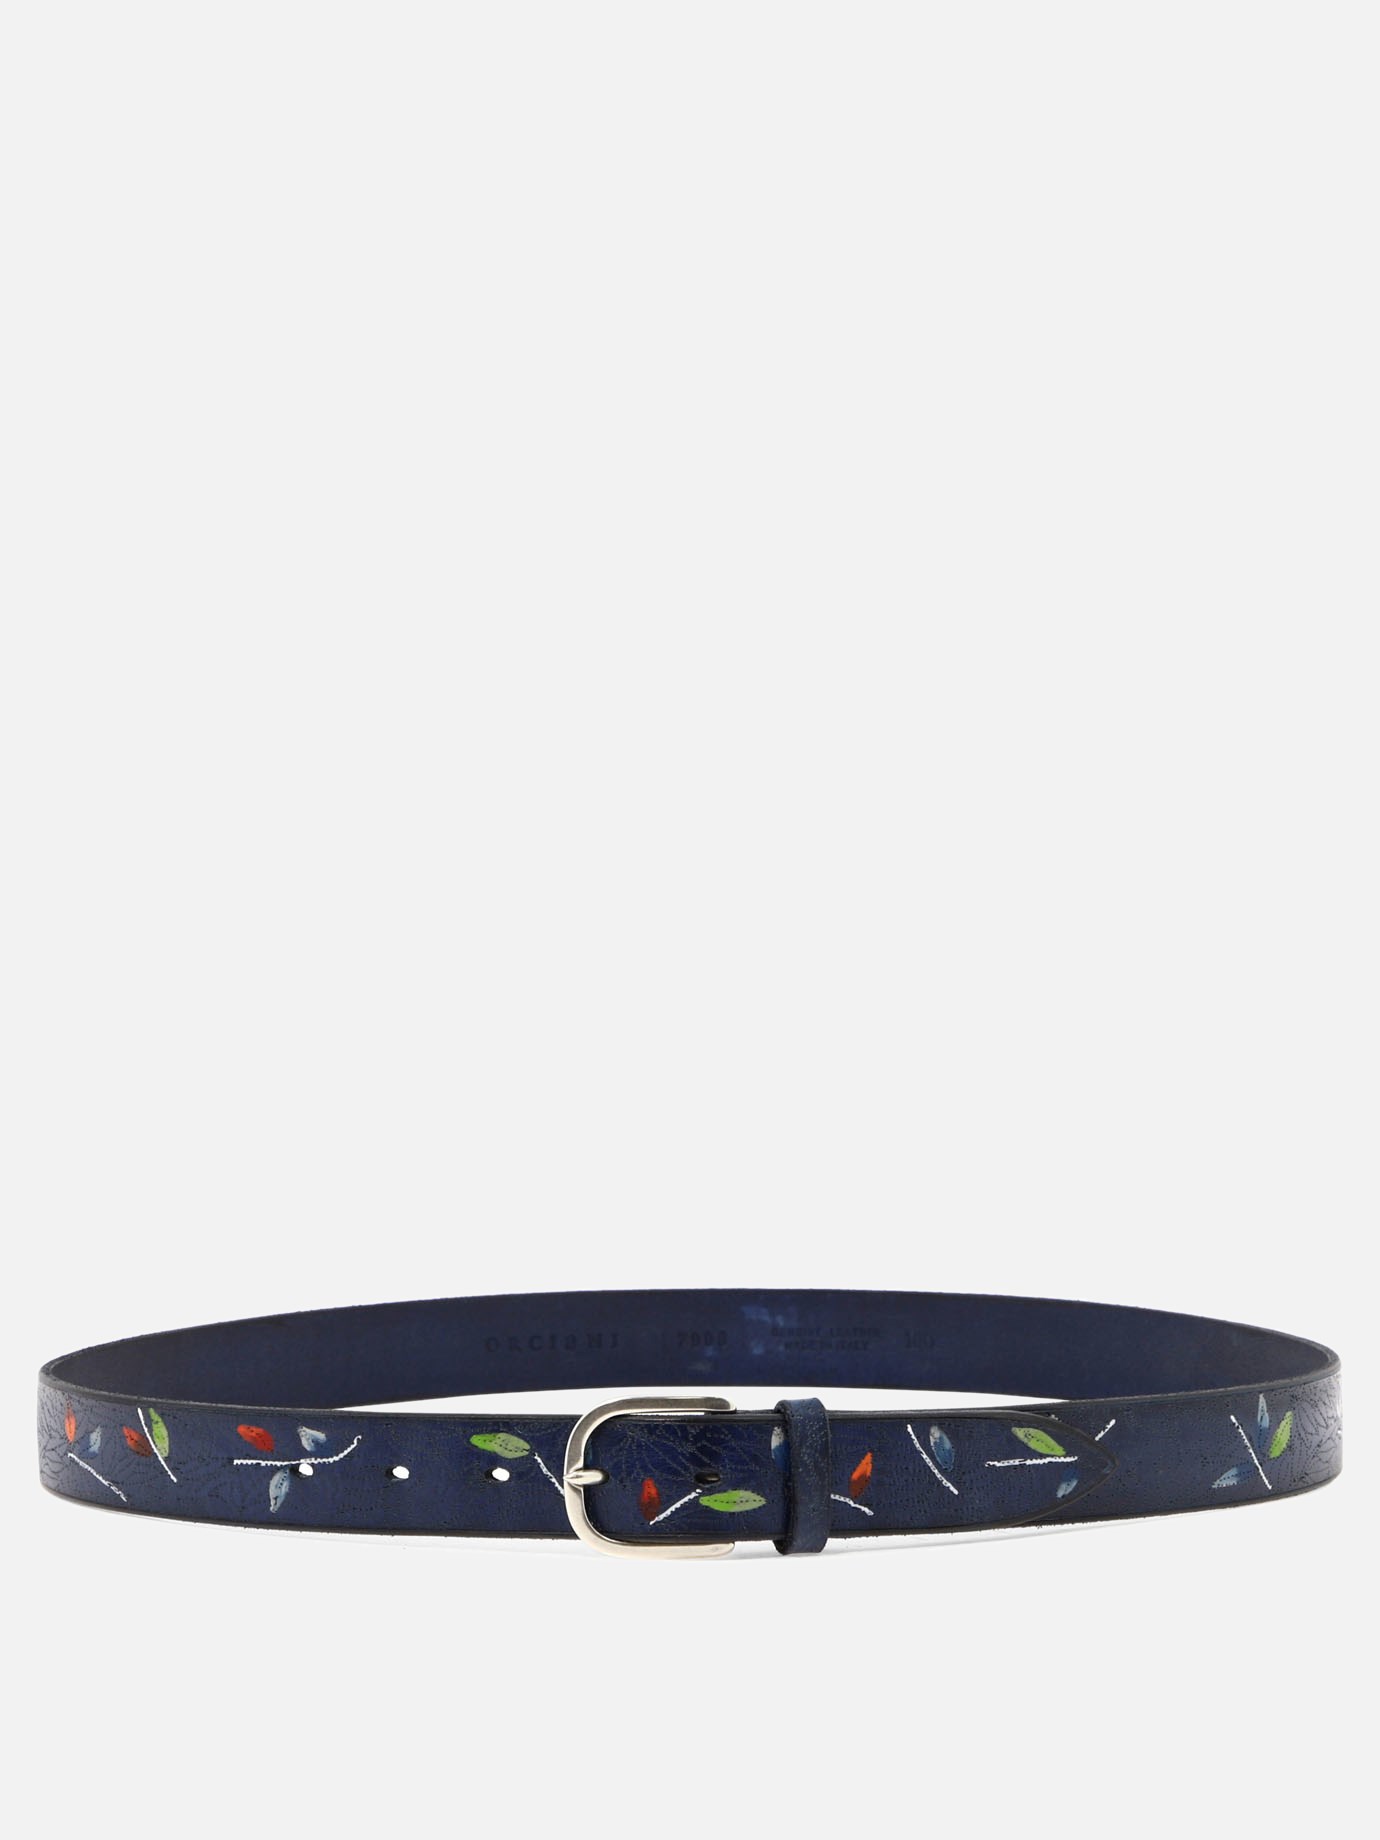  Bamboo  belt by Orciani